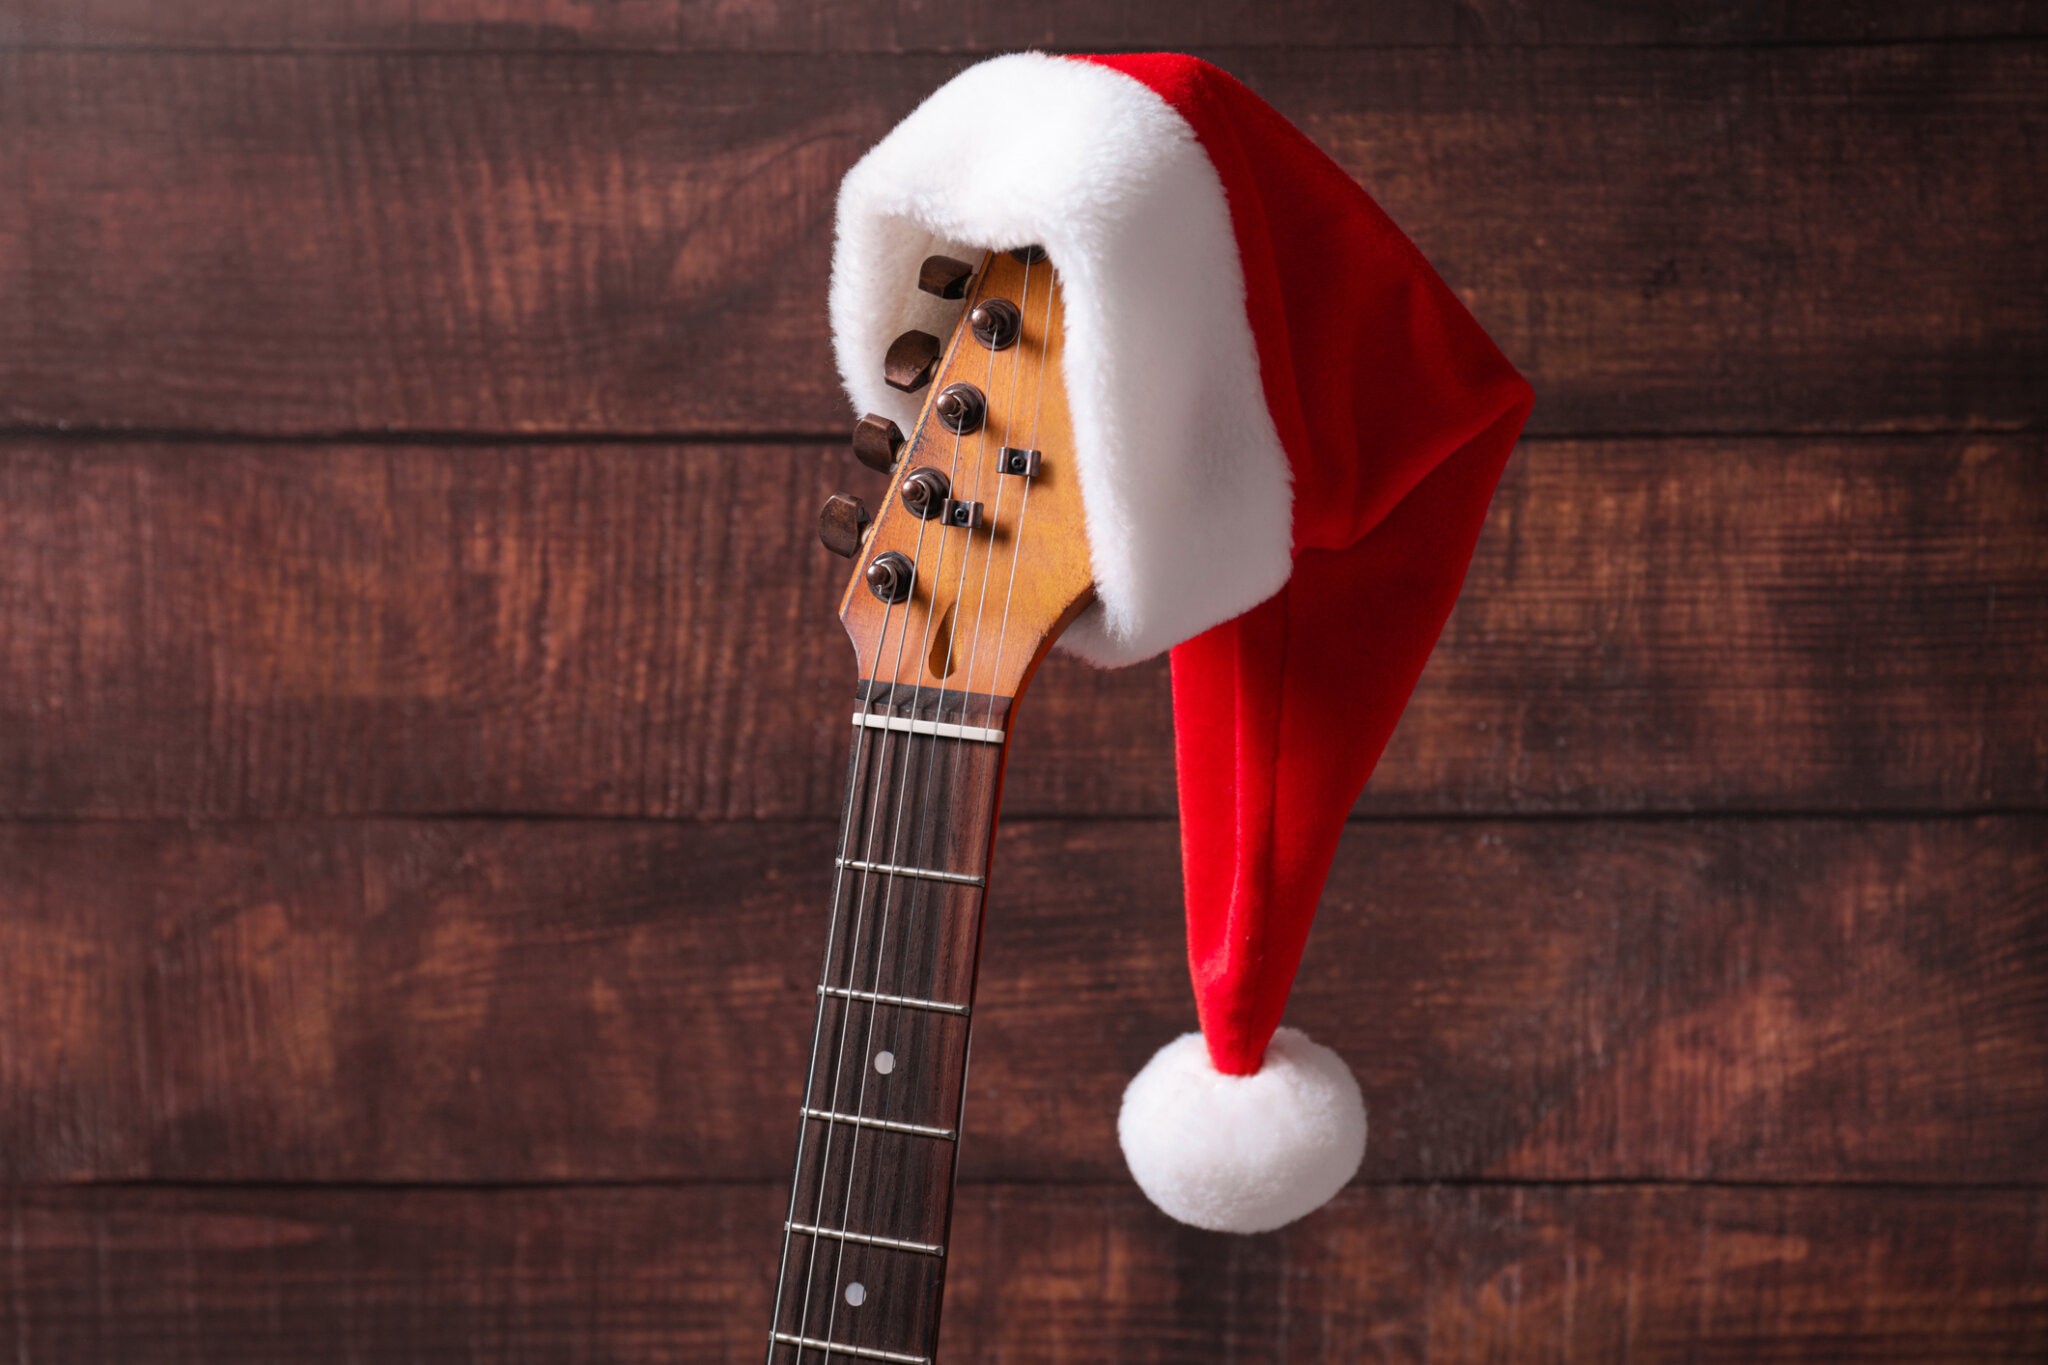 Get moving with a Rockabilly Xmas at The Suffolk Christmas